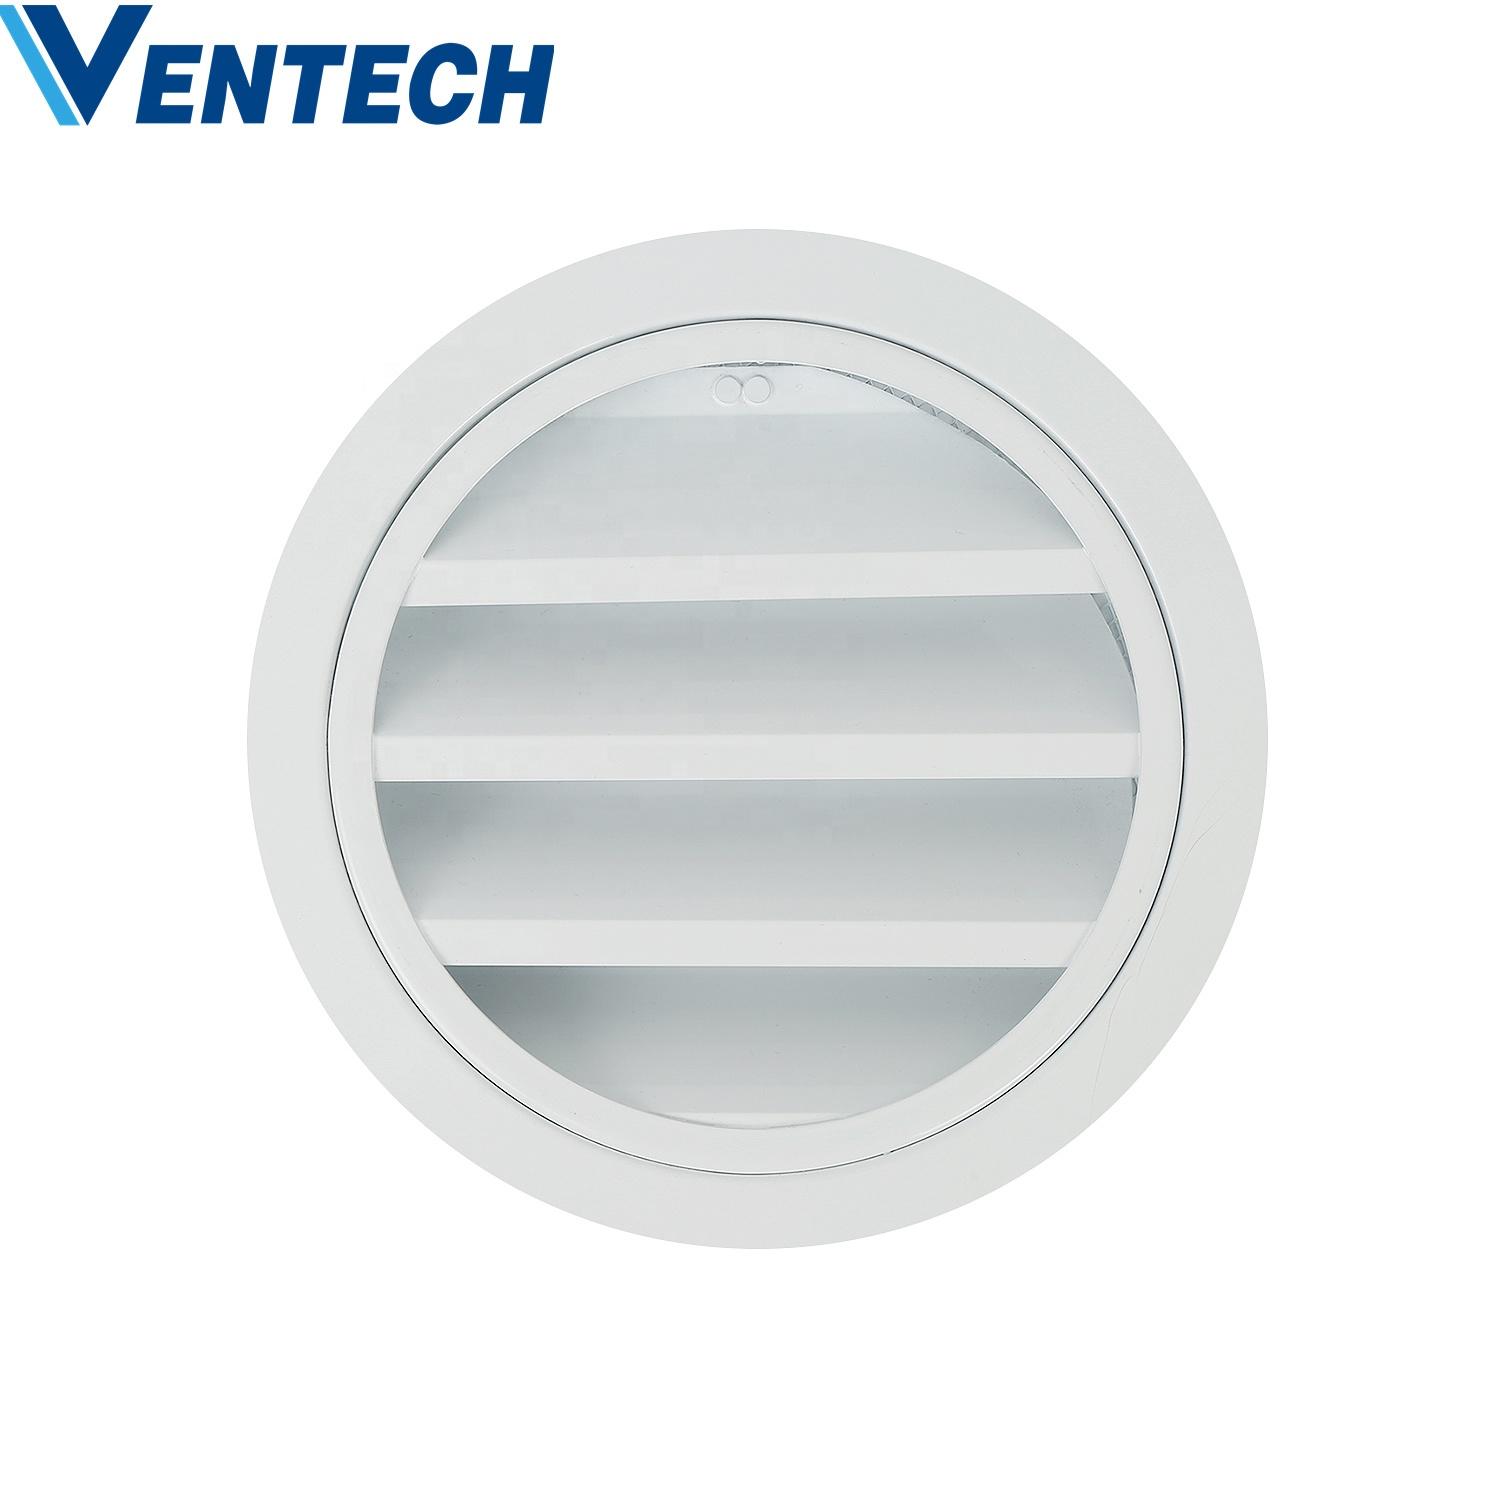 Hvac system Round Louver Grille Outlet Air Vent White Grill Cover With Insect Fly Screen Mesh For Bathroom Exhaust Ventilation